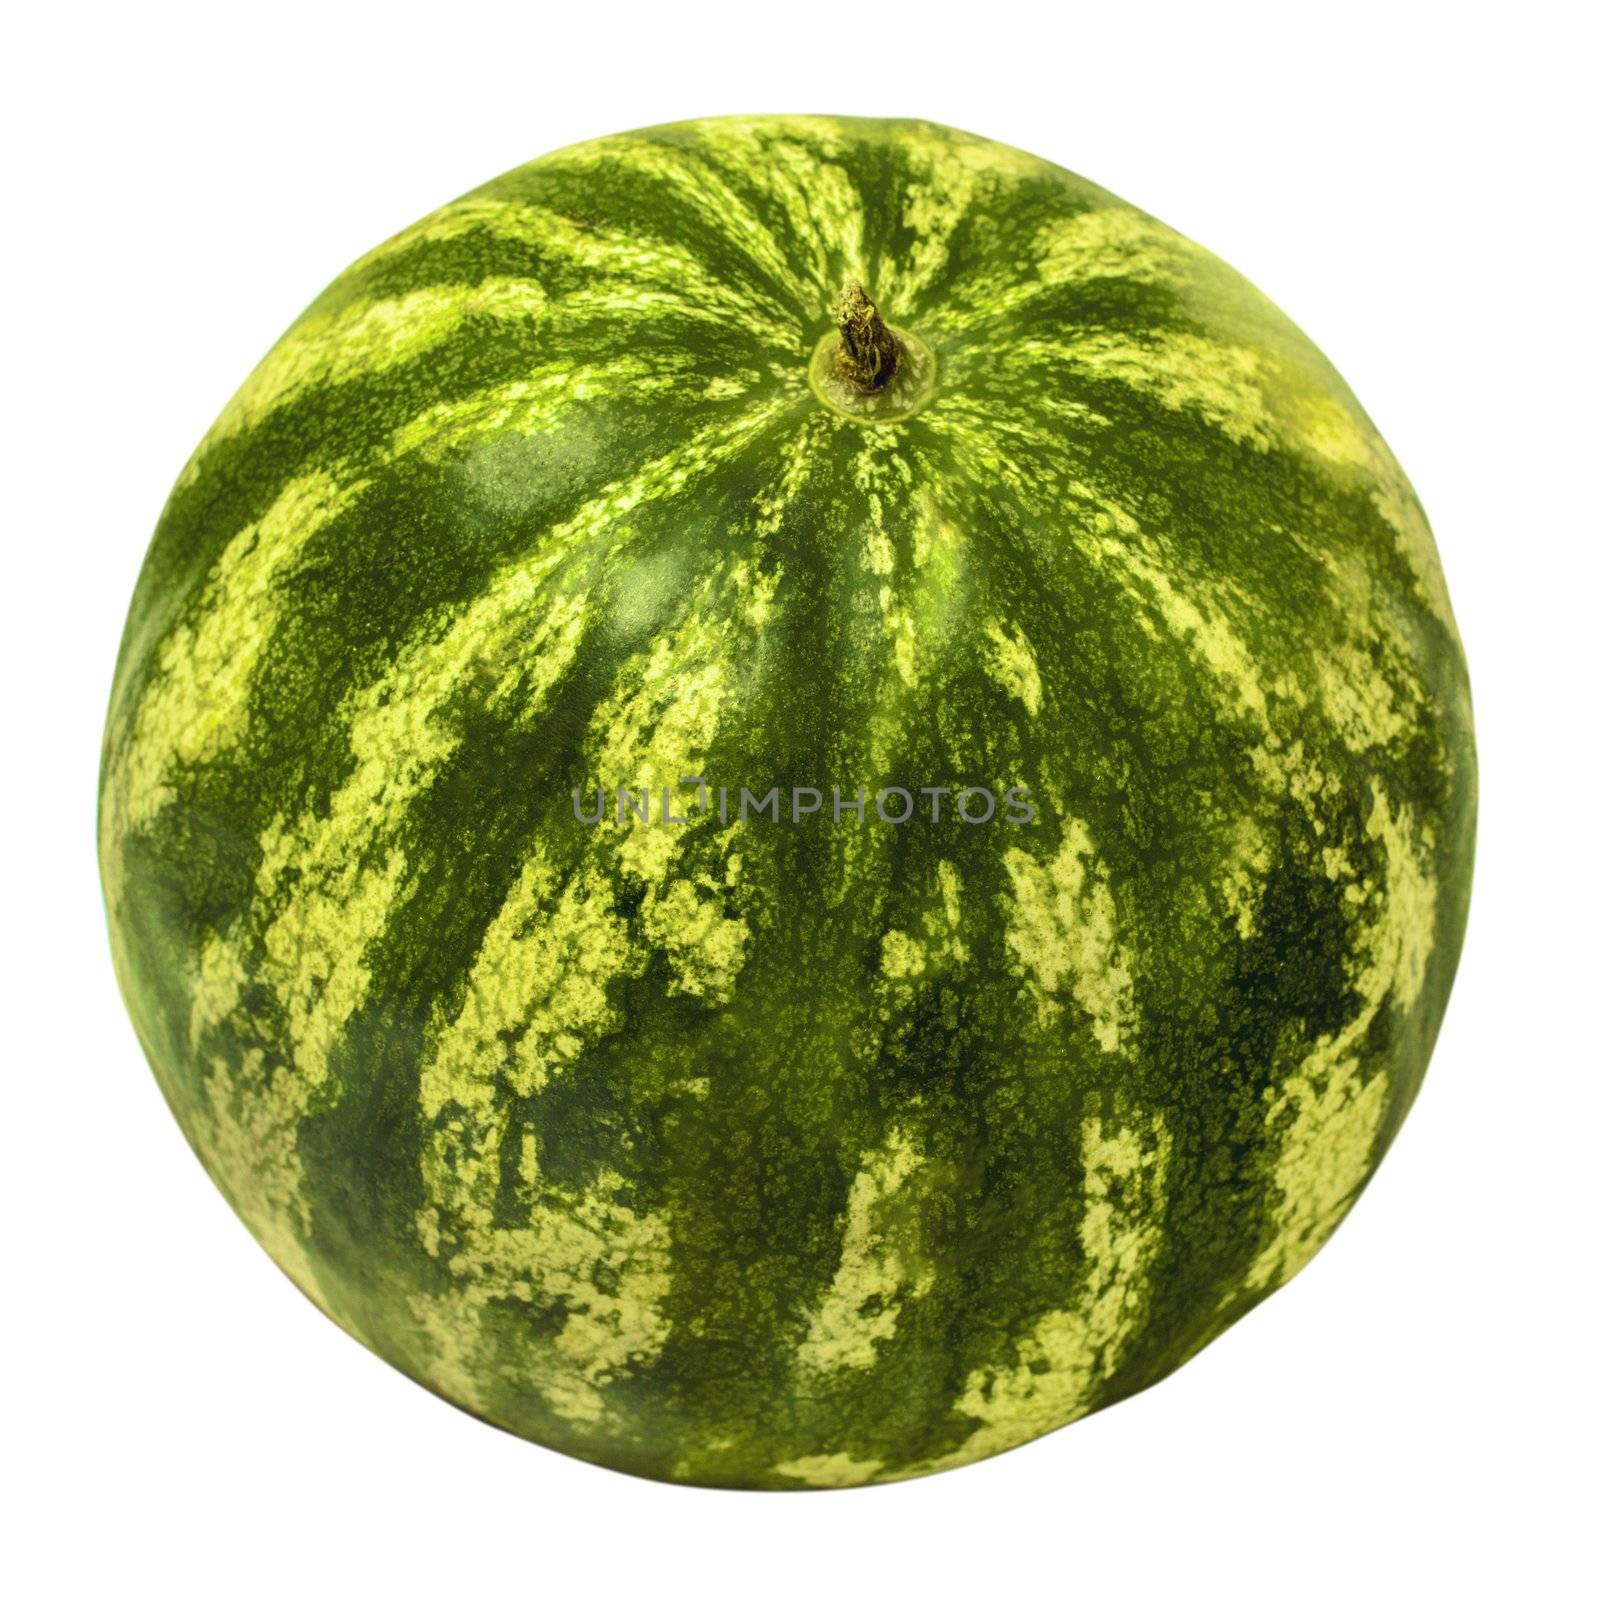 ??watermelon on a white background